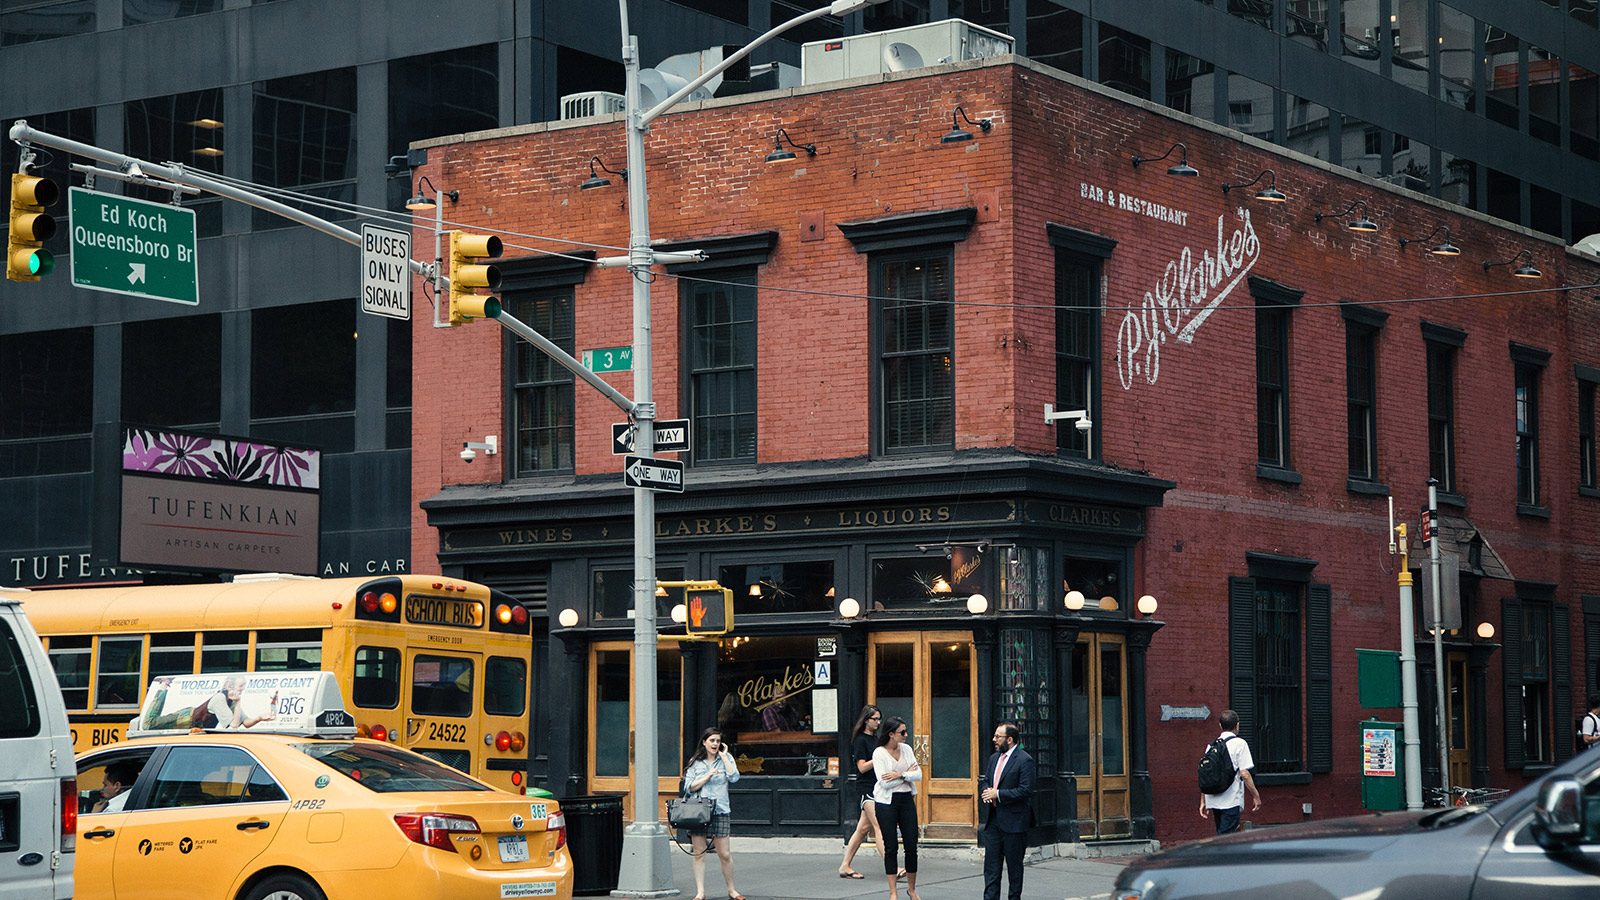 clarks nyc locations off 78% - online 